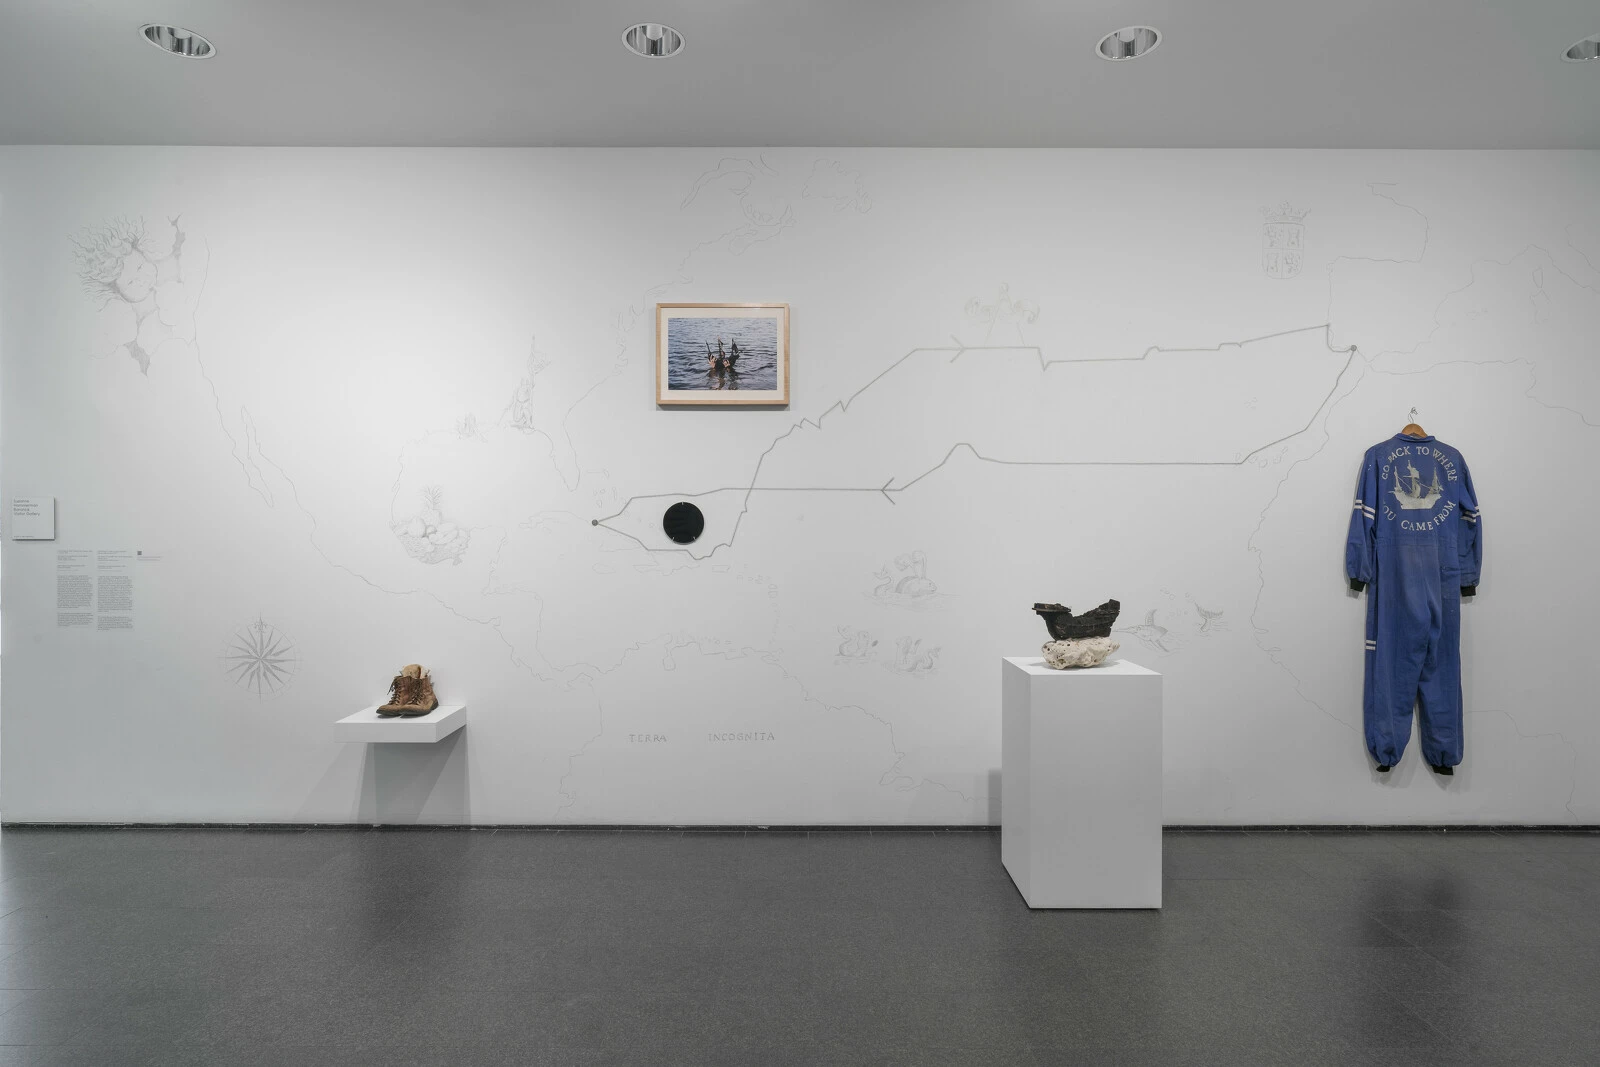 One wall of a gallery space filled with a map and objects, including shoes and a jumpsuit.